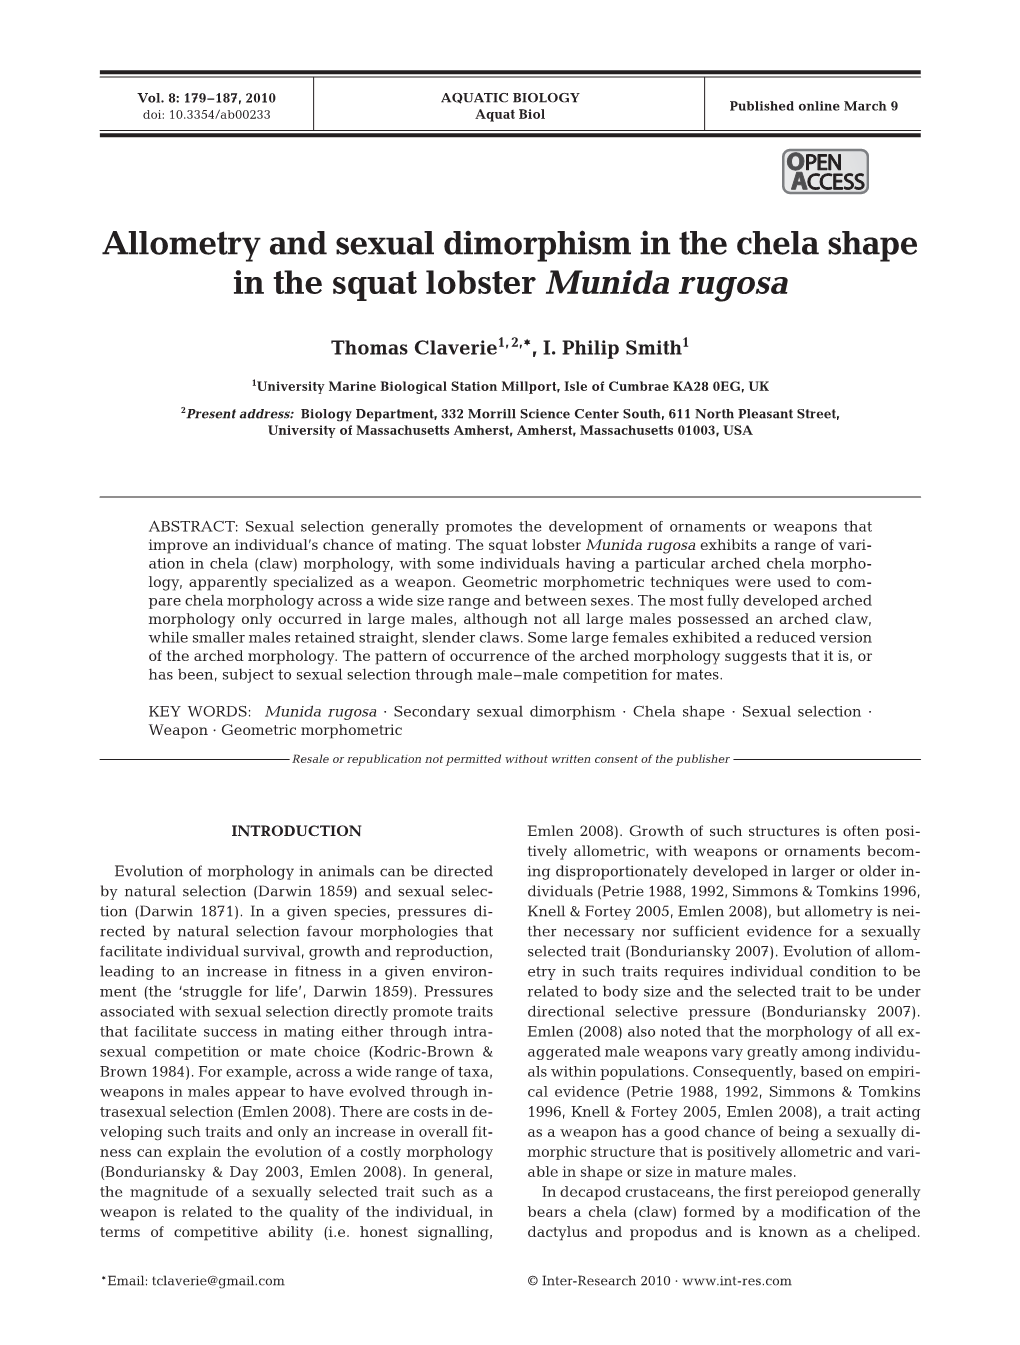 Allometry and Sexual Dimorphism in the Chela Shape in the Squat Lobster Munida Rugosa